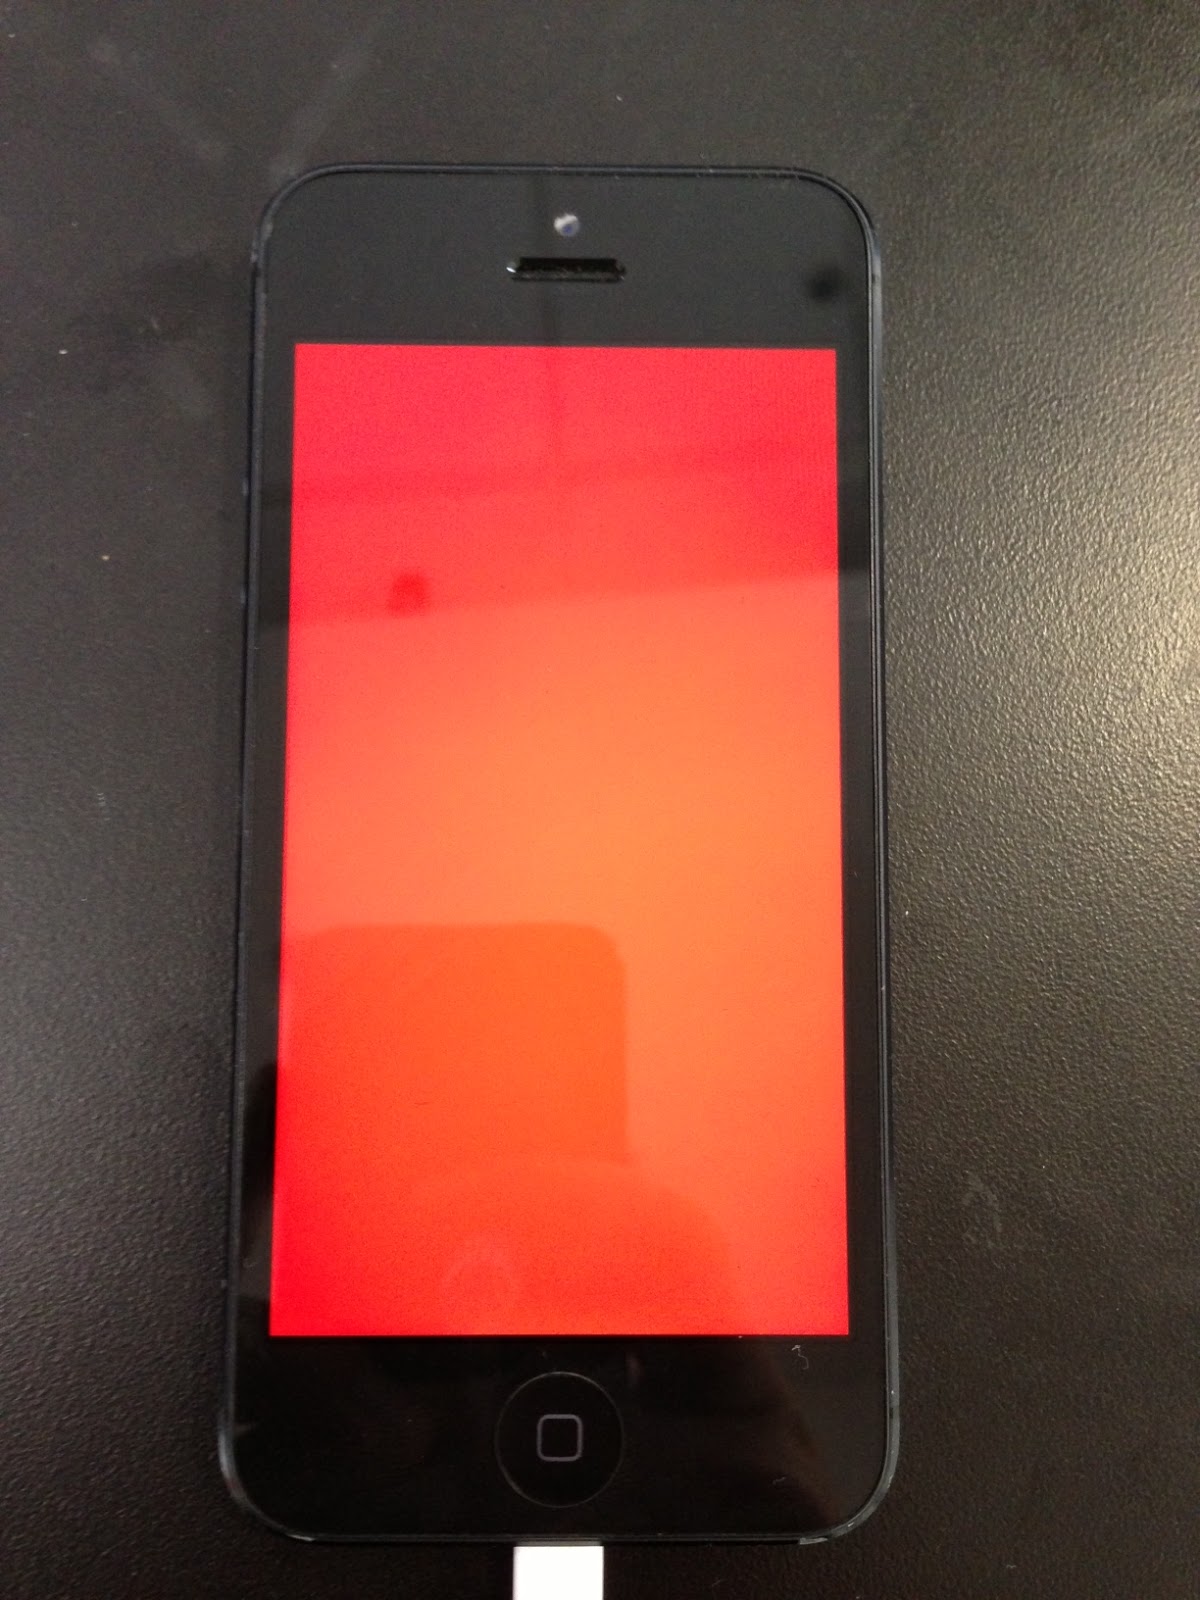 Once the iPhone returned to the boot screen (Apple logo), a command